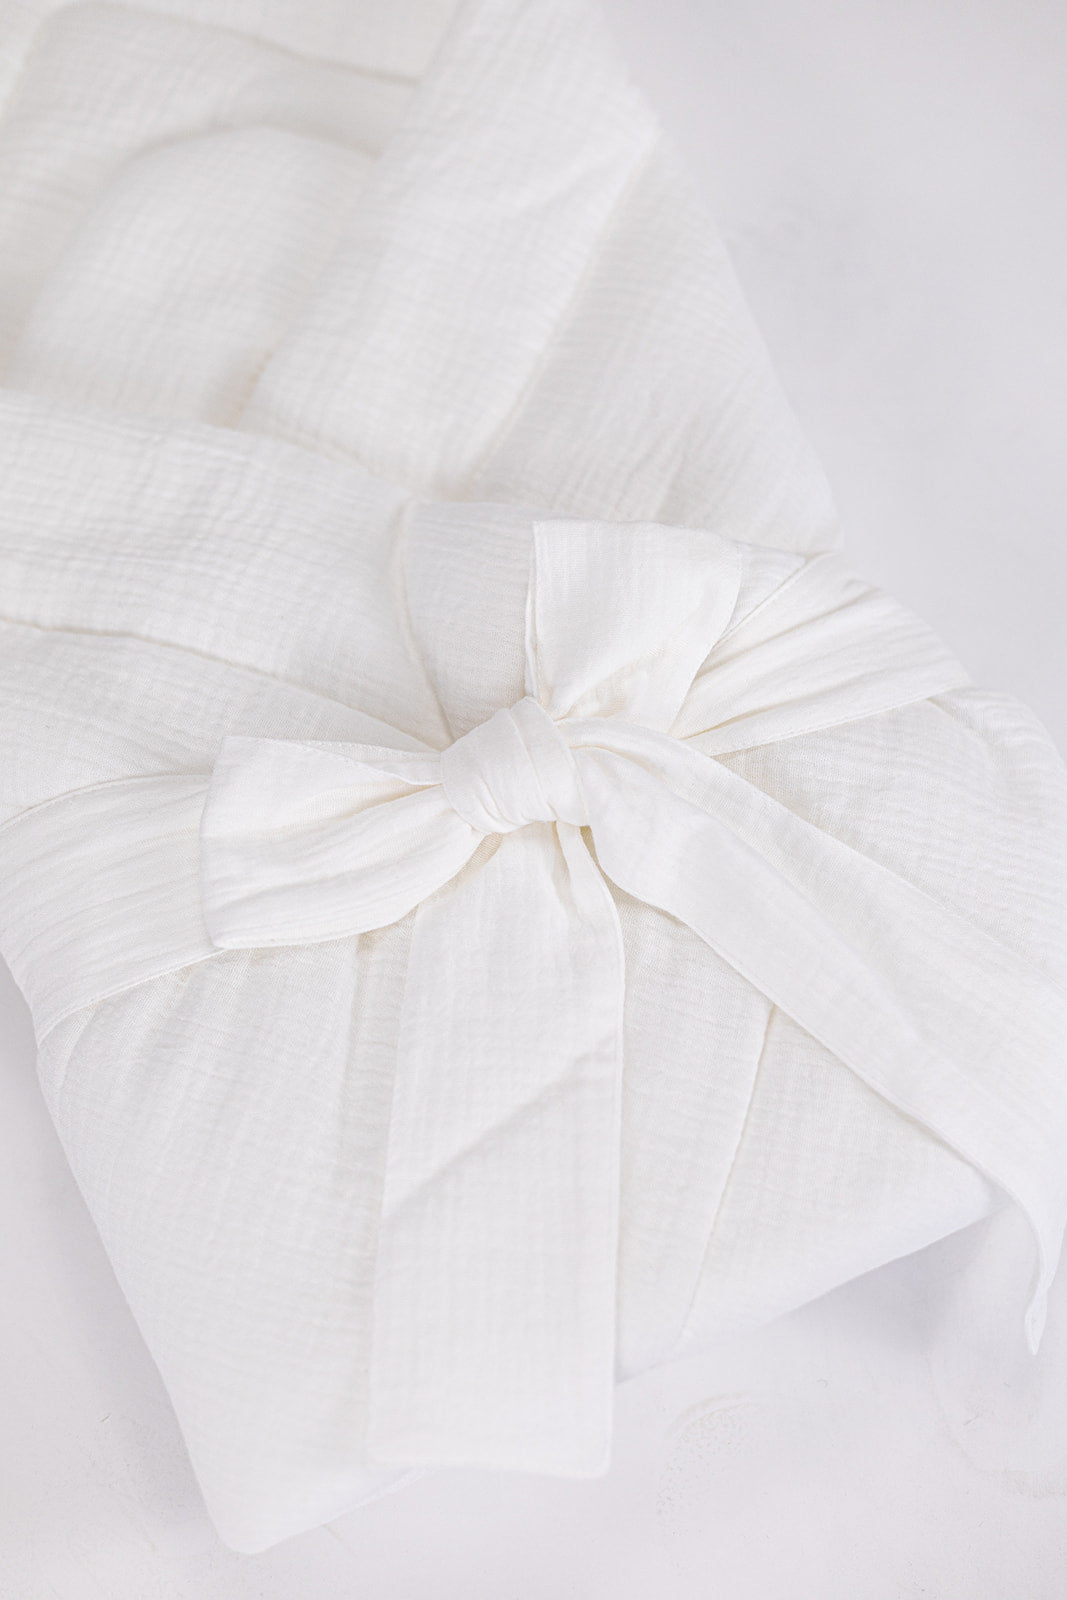 White Wrap: Tranquility in the Form of Cotton